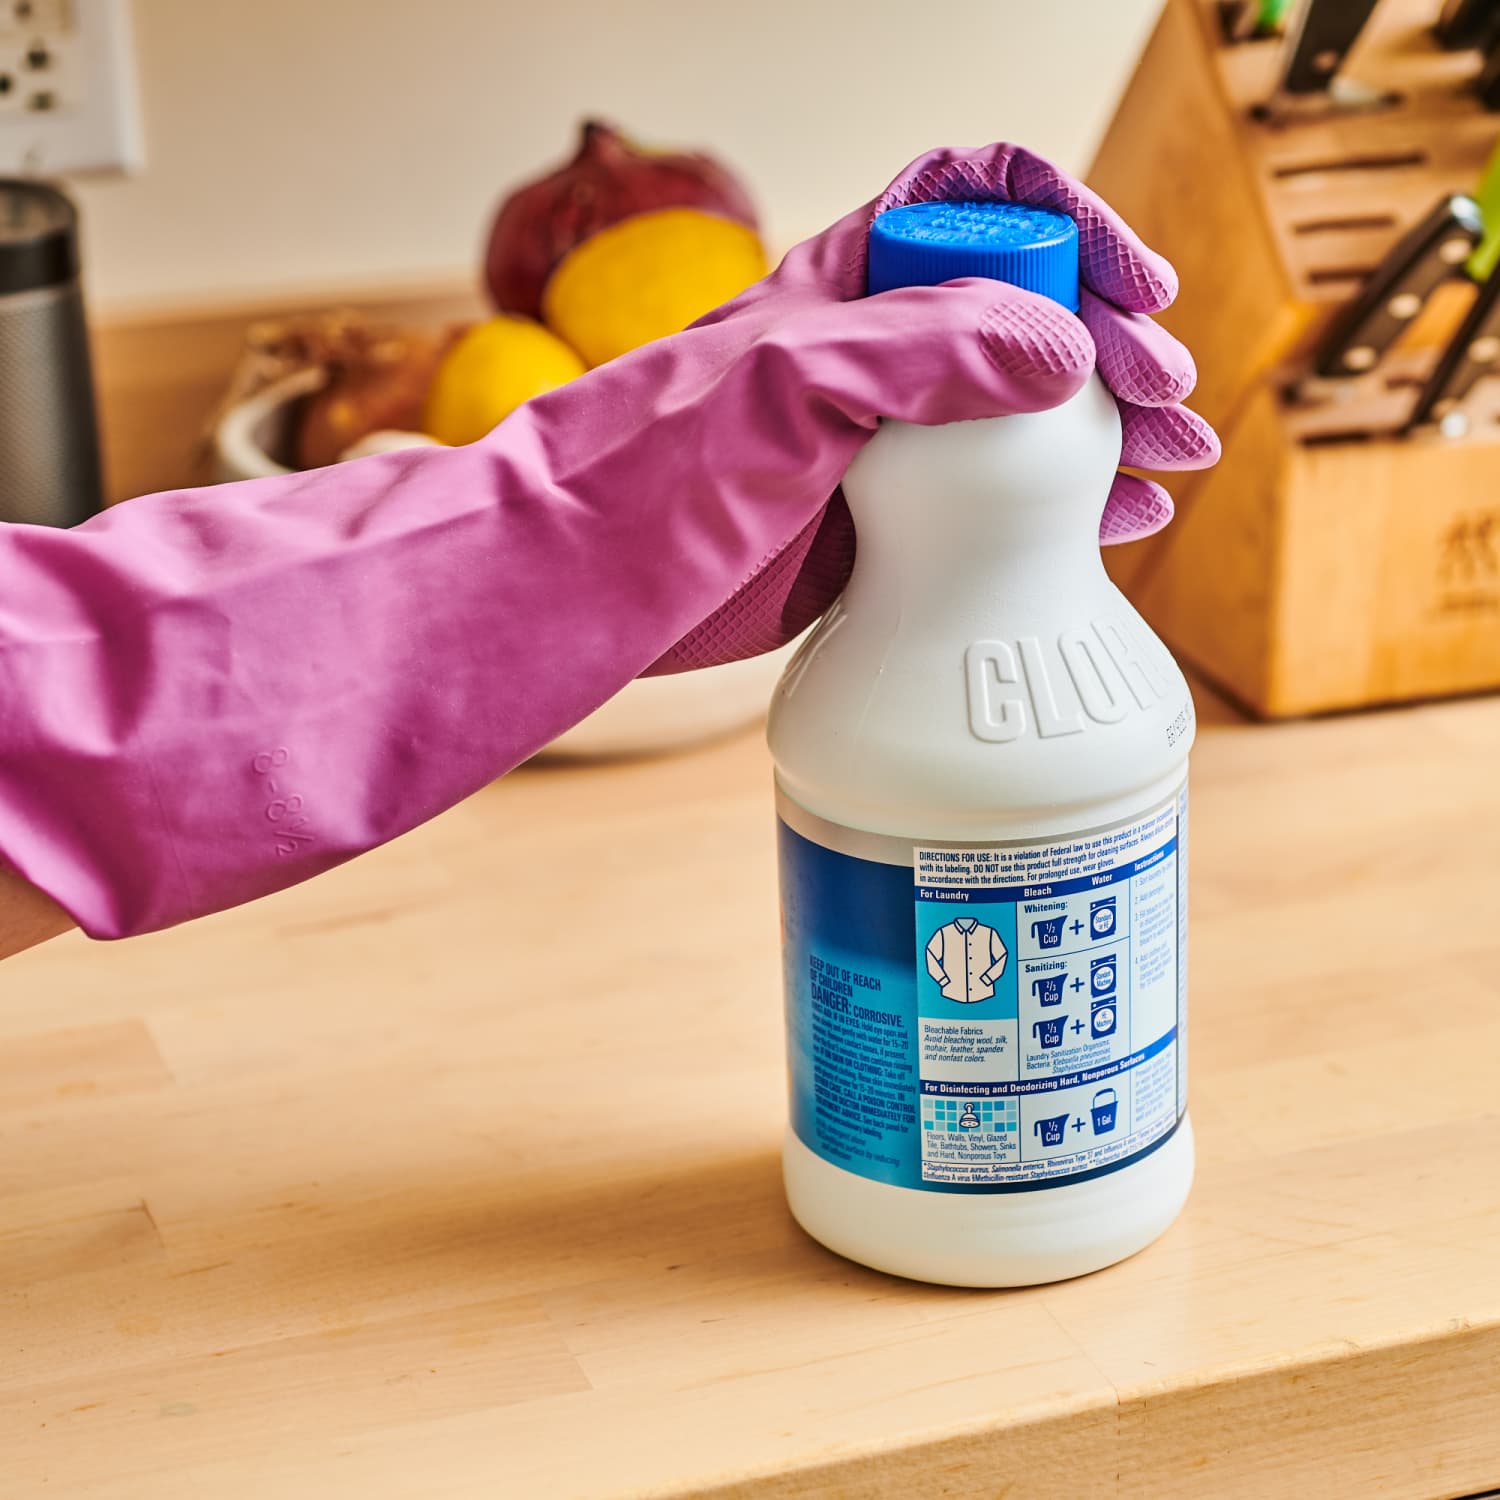 How to Choose Cleaning Products Safe Enough to Use Around Your